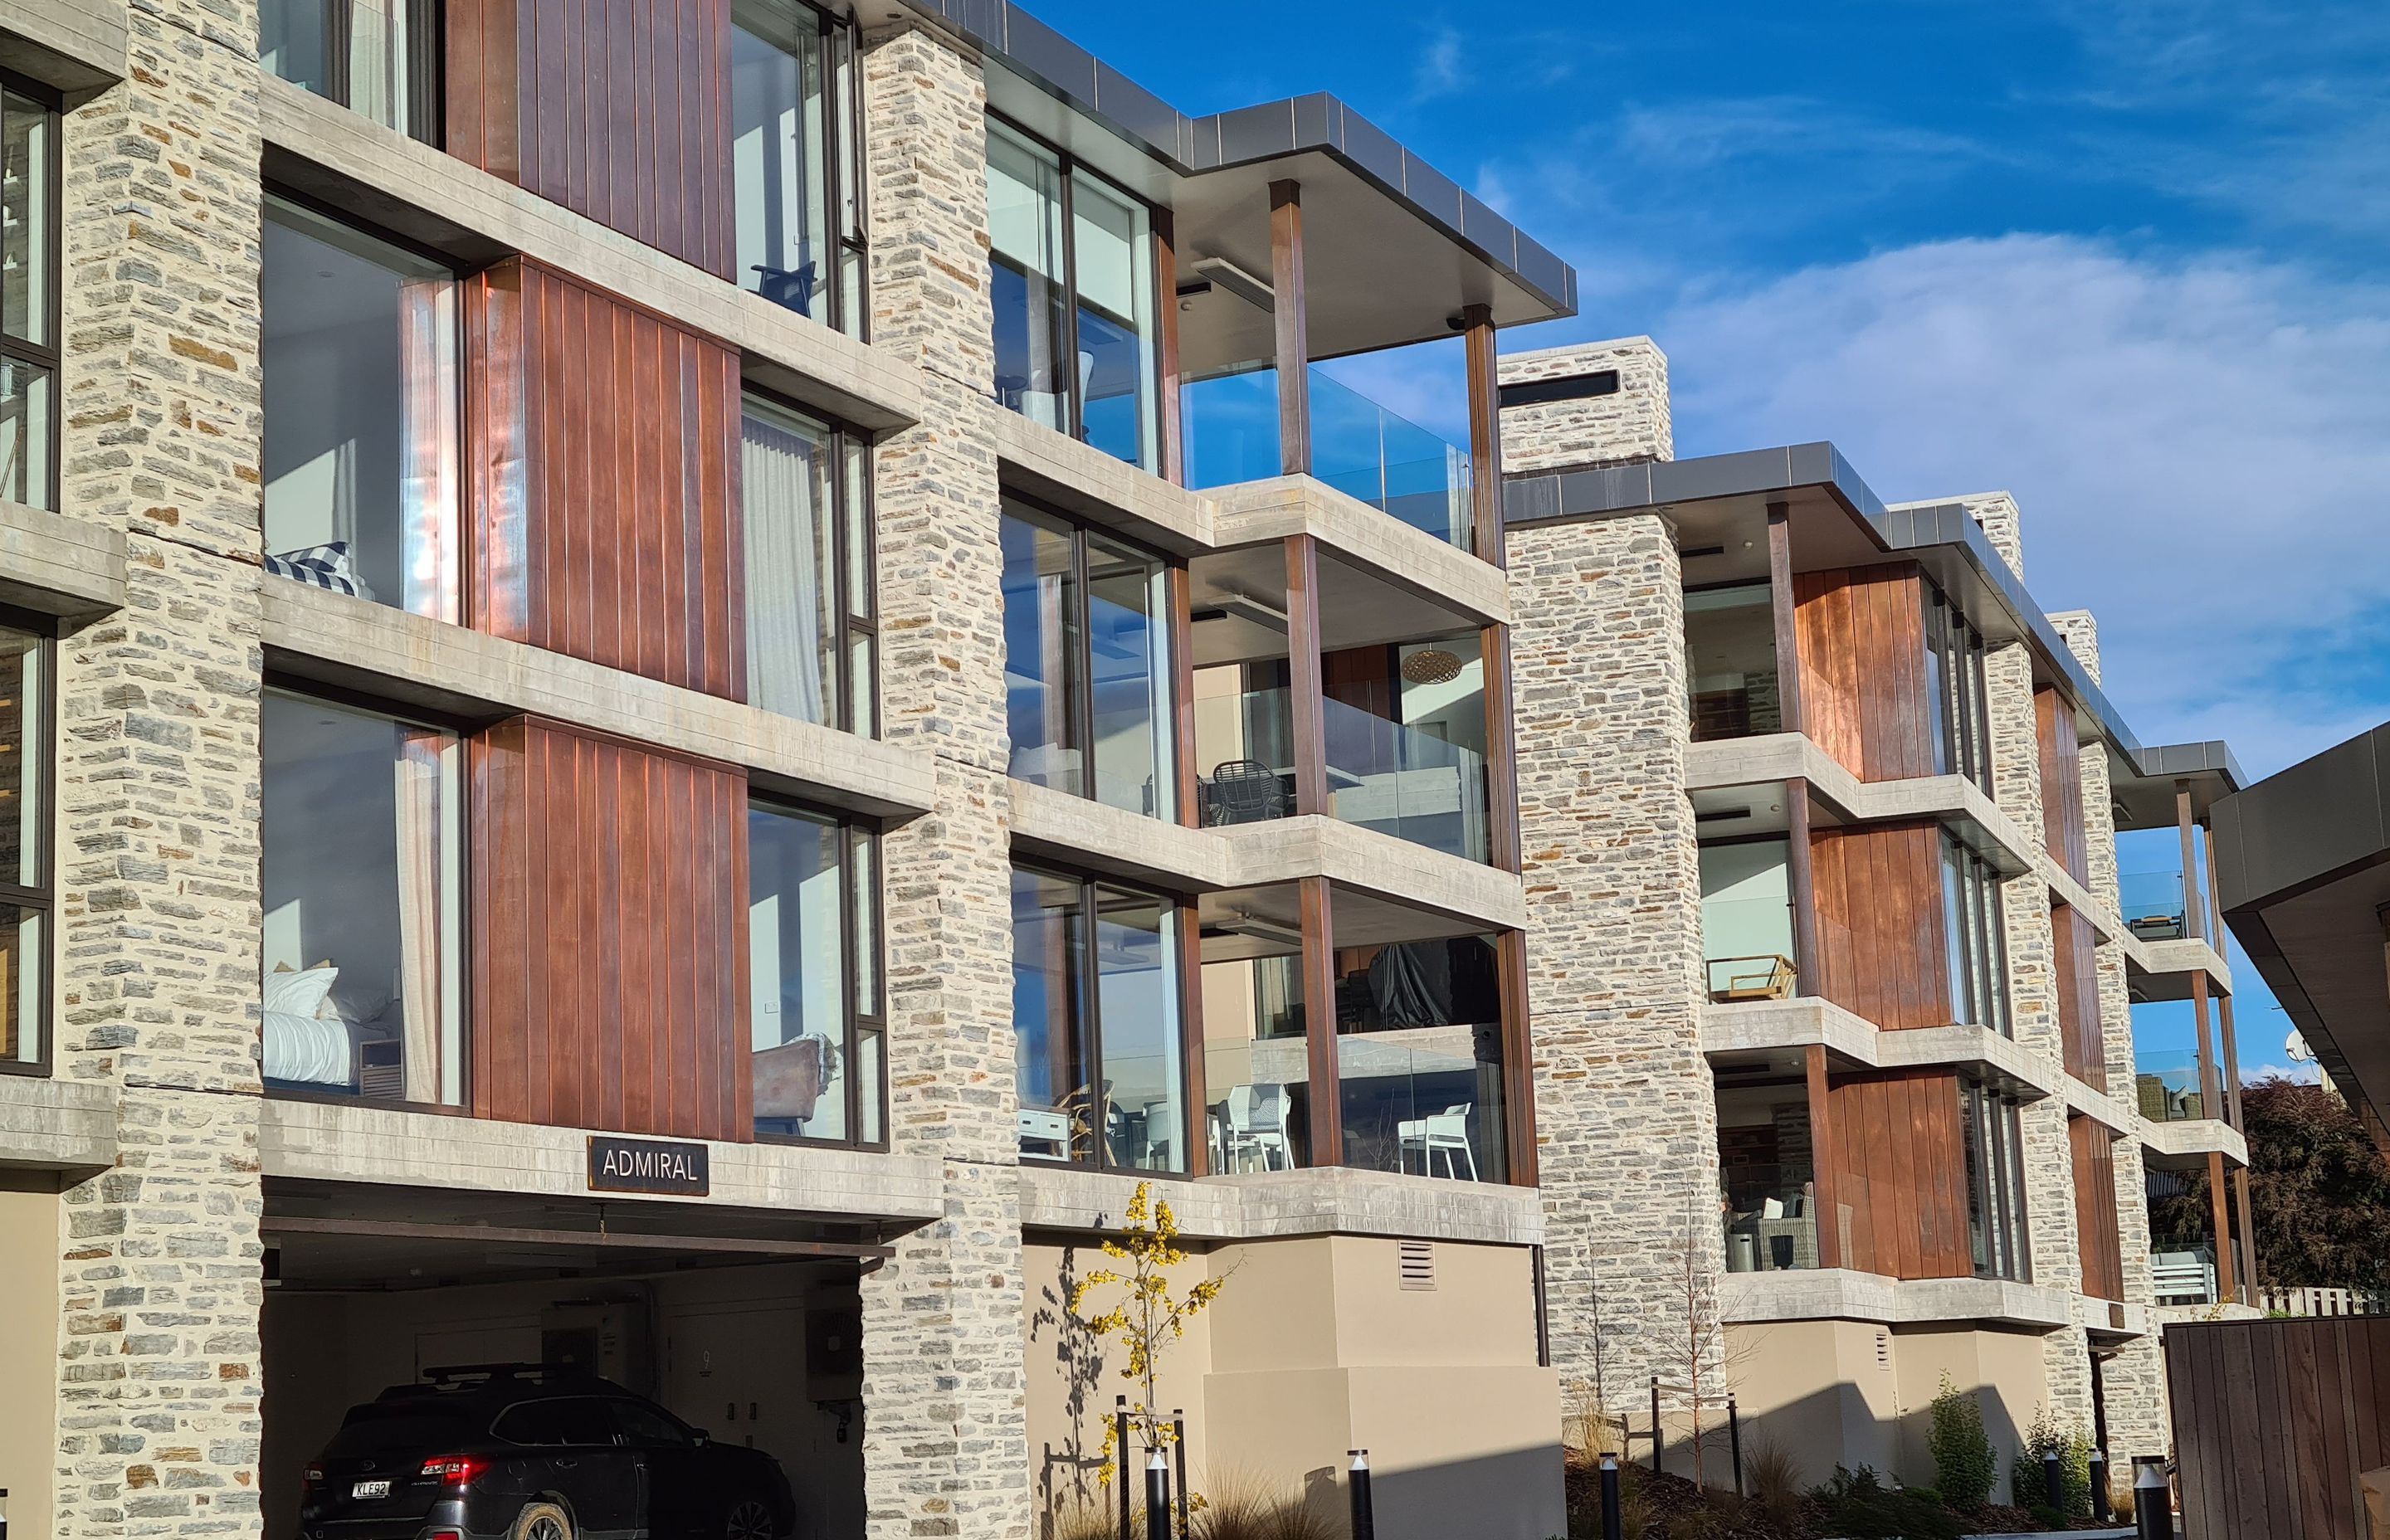 This medium density project was clad partially in Island Stone schist.